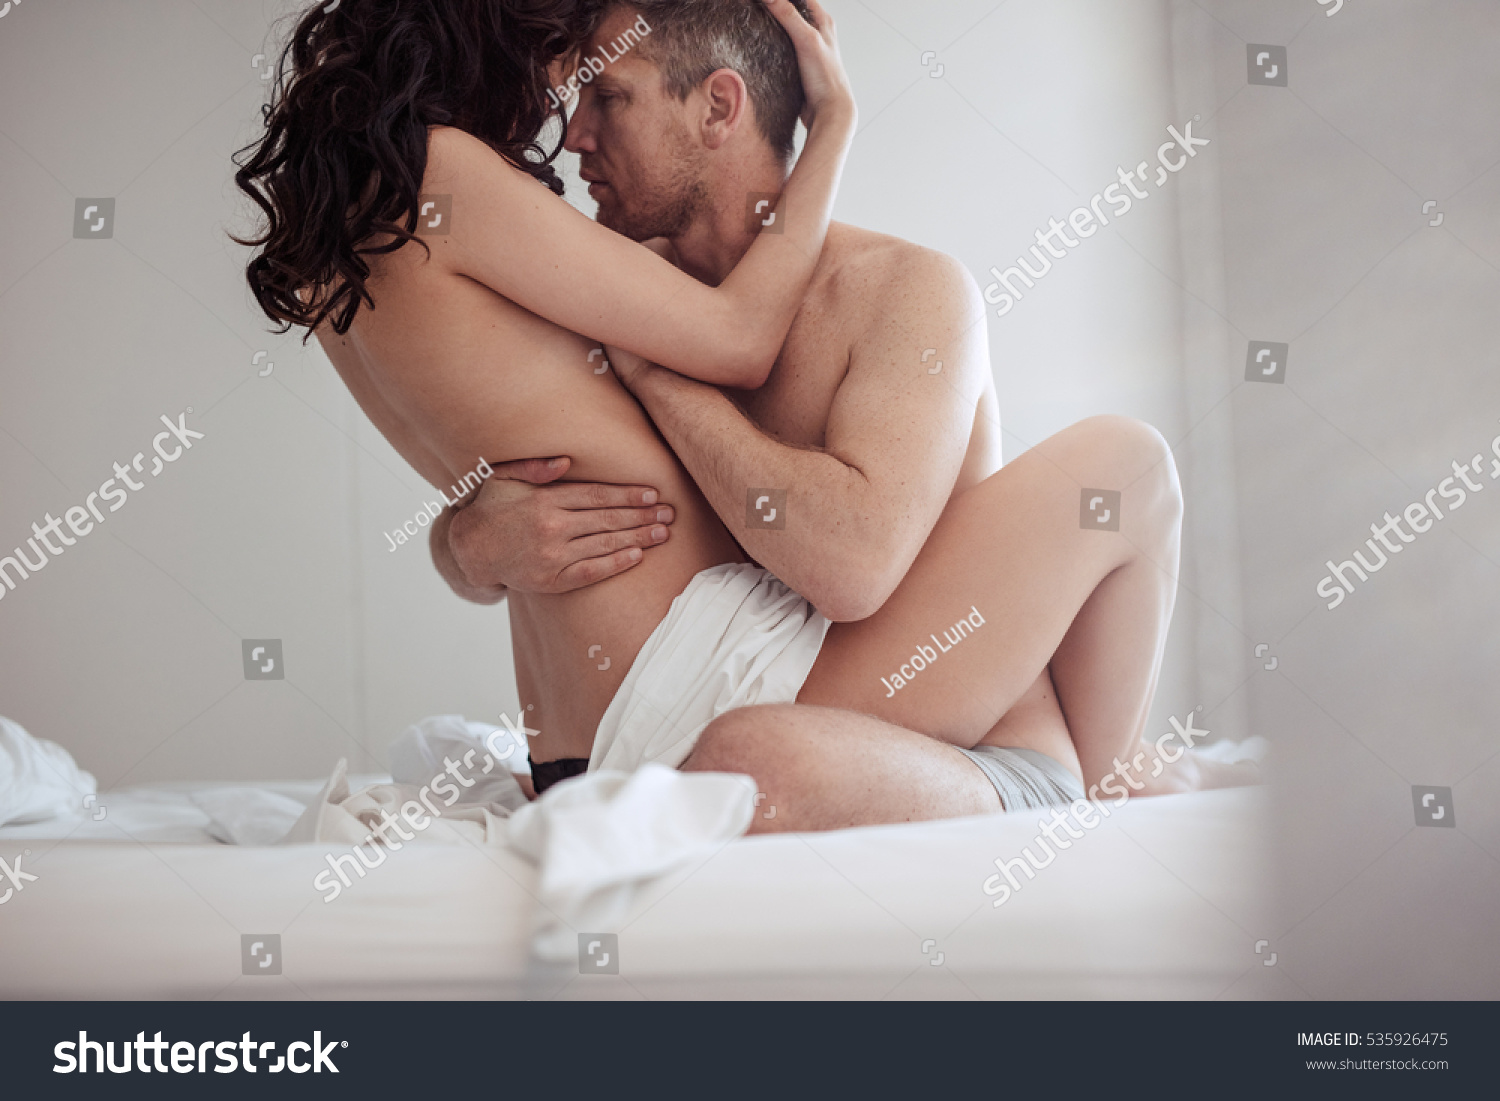 Couple Naked Sex In Bed - Intimacy sexual